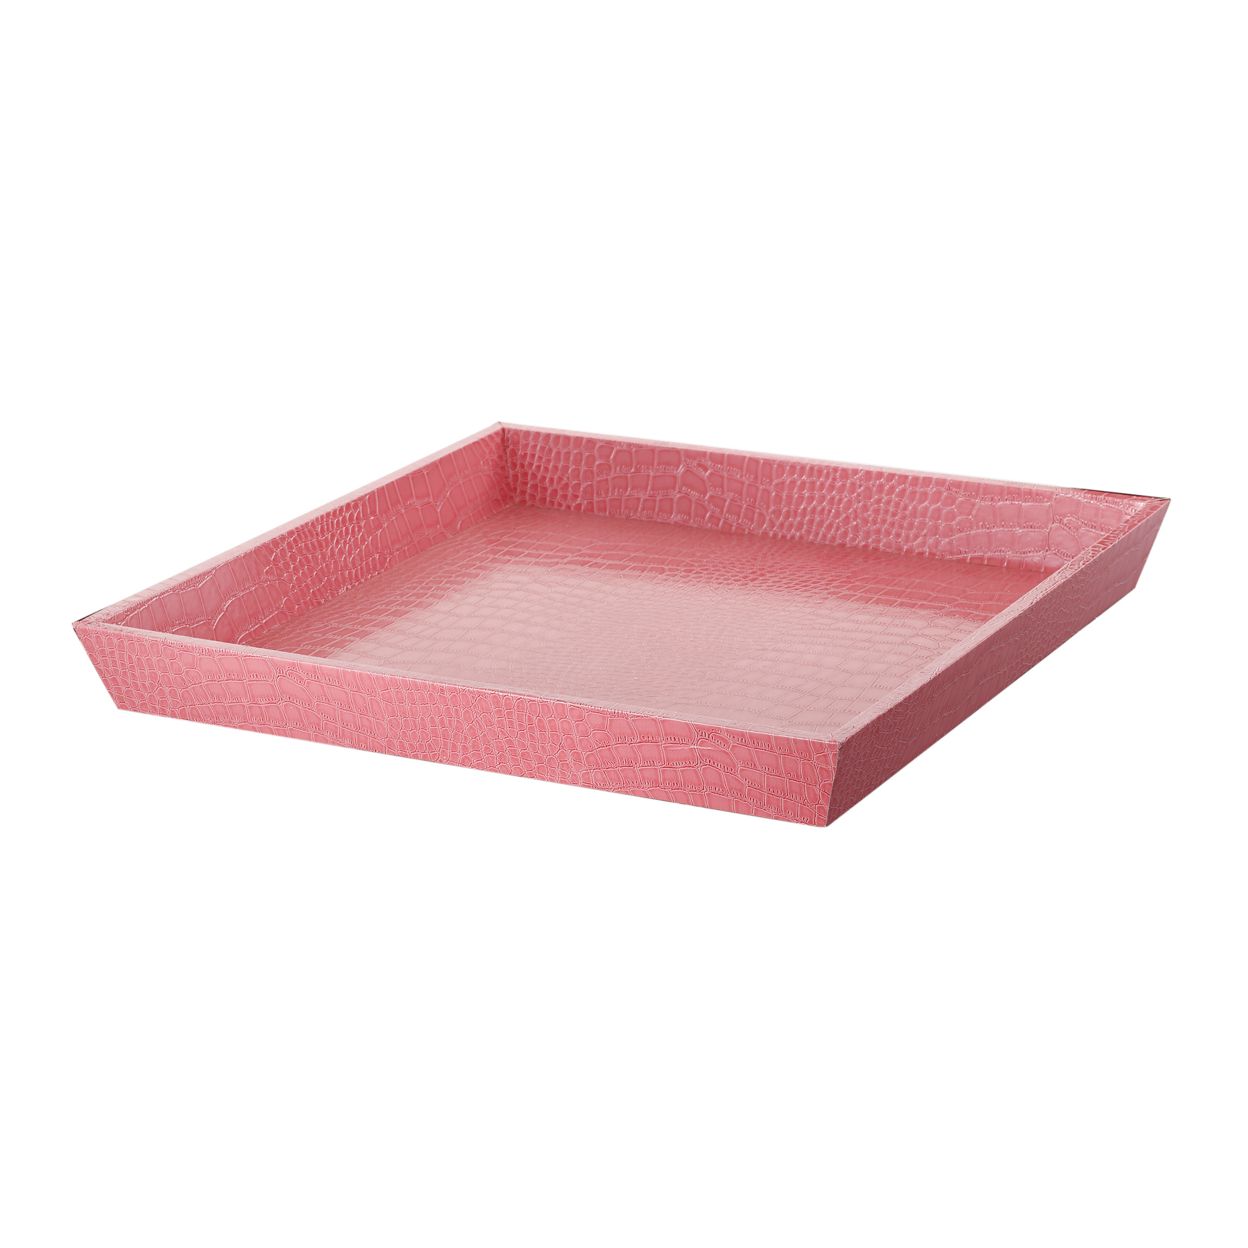 Wood And Leatherette Decorative Serving Tray With Raised Sides, Pink- Saltoro Sherpi